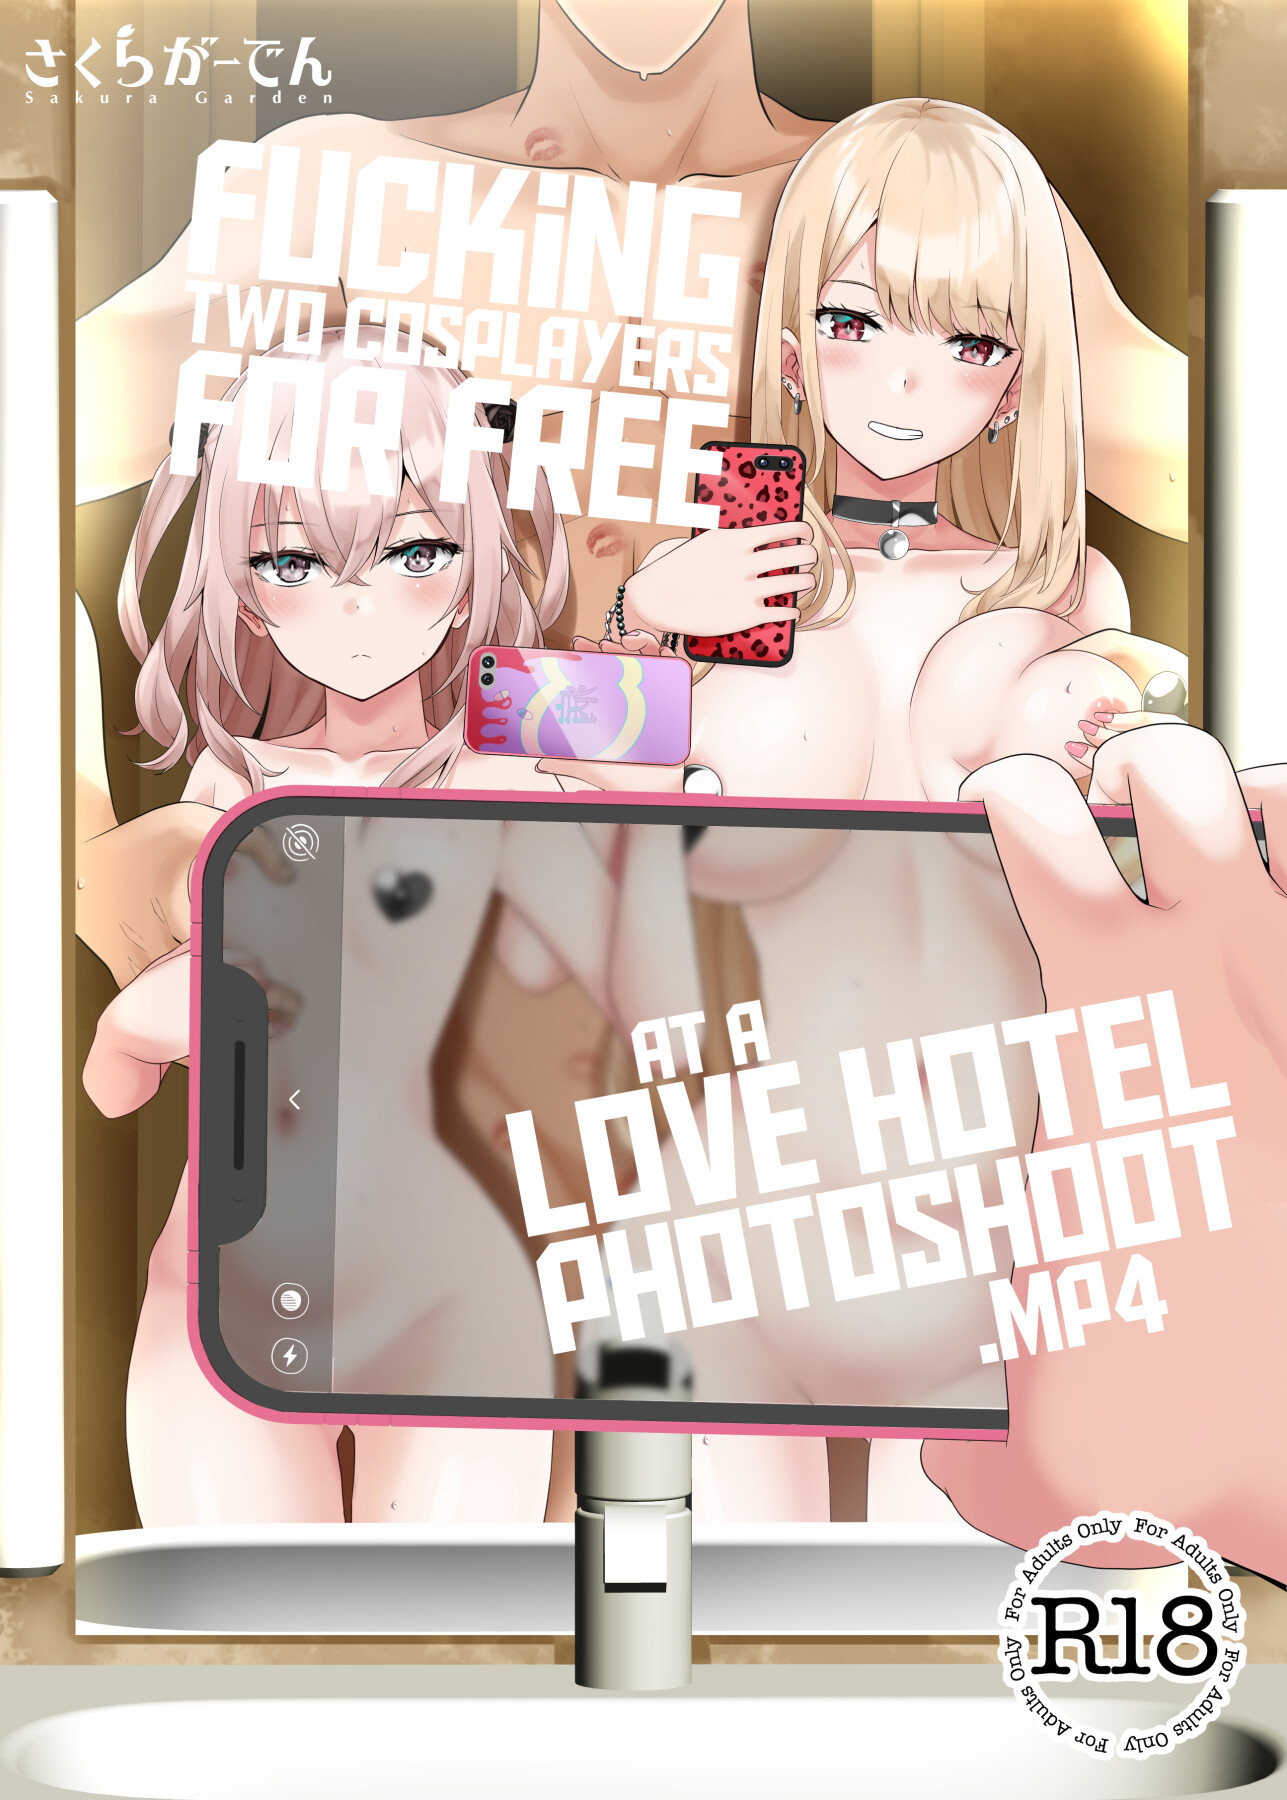 Hentai Manga Comic-Fucking Two Cosplayers For Free at a Love Hotel Photoshoot.mp4-Read-1